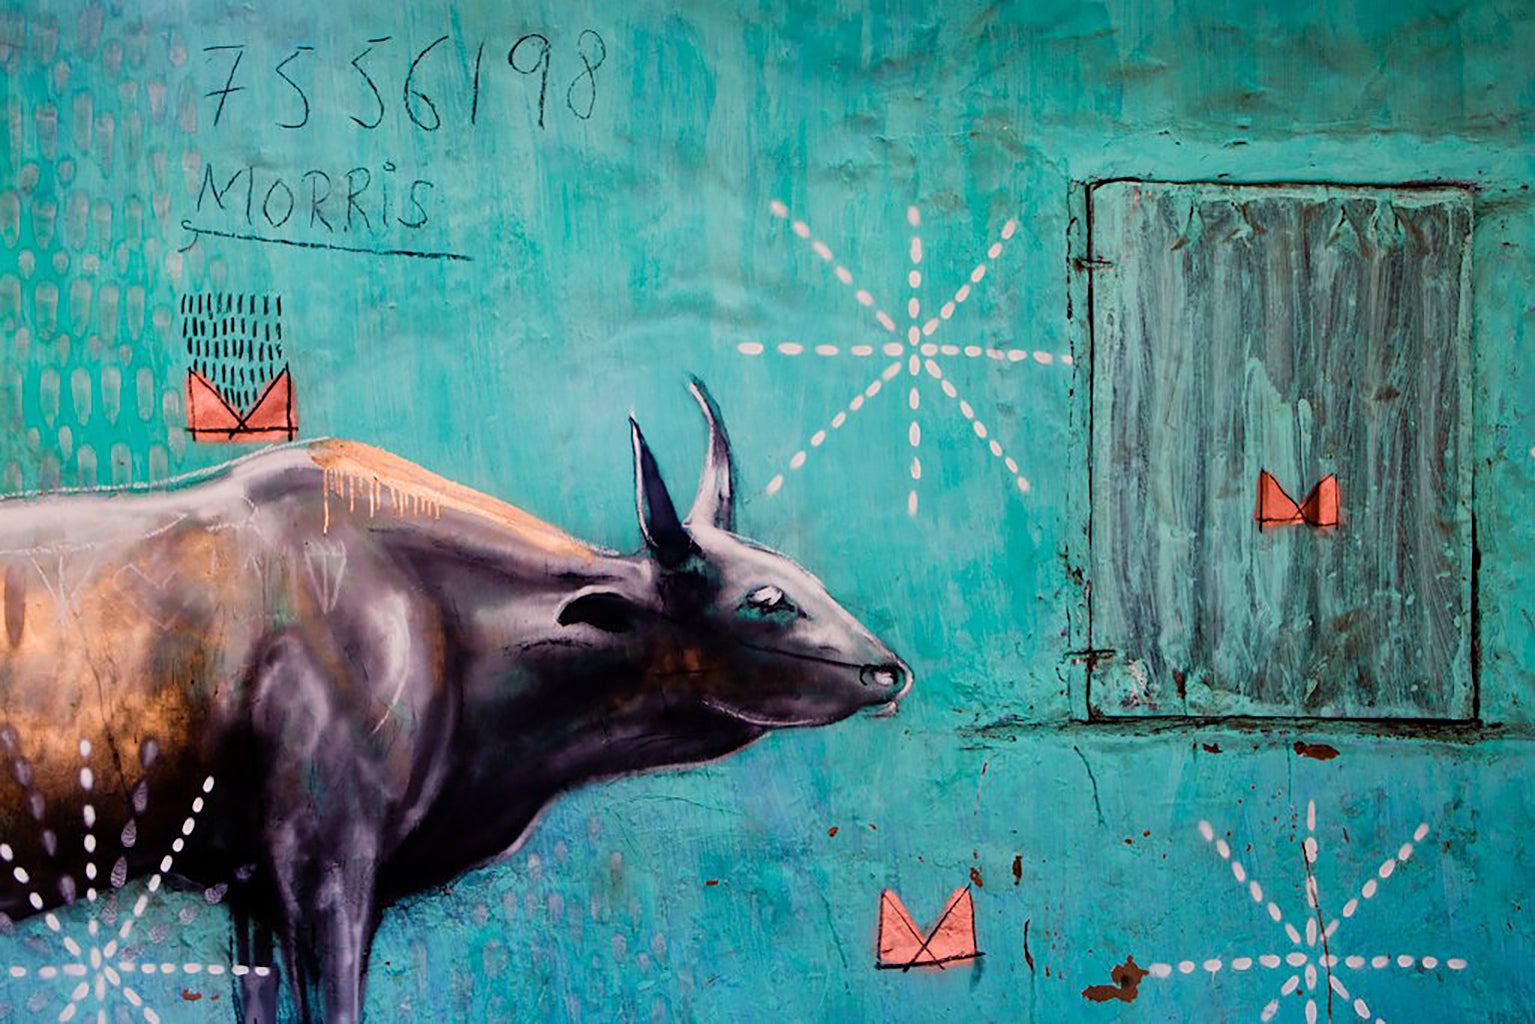 Based in The Gambia, Wide Open Walls is a spectacular local village living art project.  A collaboration by Lawrence Williams (co-founder of Mandina Lodges and Makasutu Reserve) and local artist Njogu Toray (known as Bushdwellers), was the start of something special. An idea to turn part of the village of Kubuneh within the Ballabu area of The Gambia into a living art project saw street artists from around the world visit several times from 2009 to 2011 to paint graffiti art on the walls throughout the village. The result, a spectacular outdoor gallery of artwork capturing the essence of village life and the West African environment.  Today, the project has grown to more then 400 works of art across 14 villages in the area which travellers to Makasutu are welcome to visit. If you would like to view more of this unique village art, watch this YouTube clip or visit Mandina Lodges.